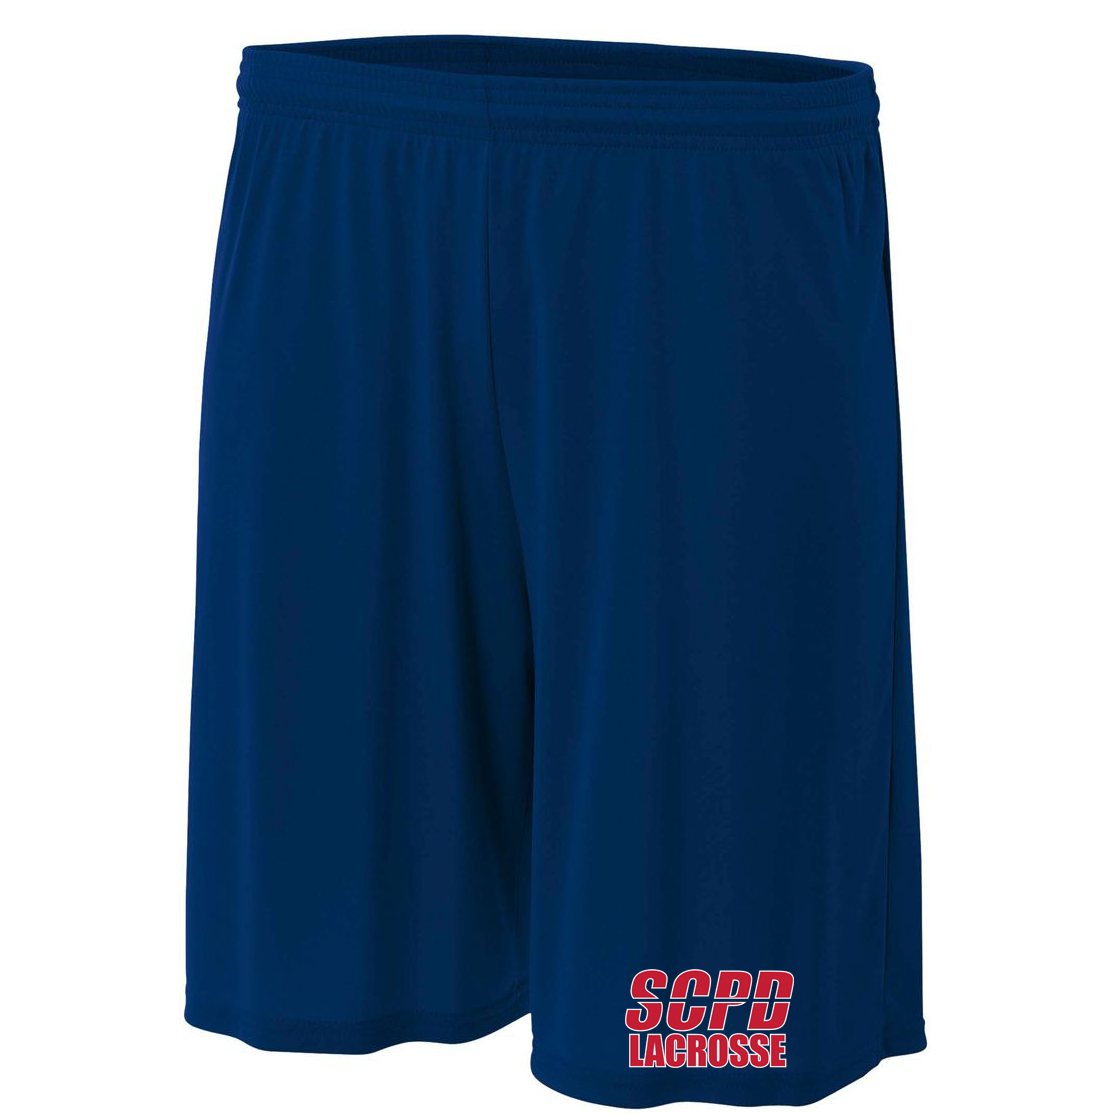 SCPD Lacrosse Cooling 7" Performance Shorts